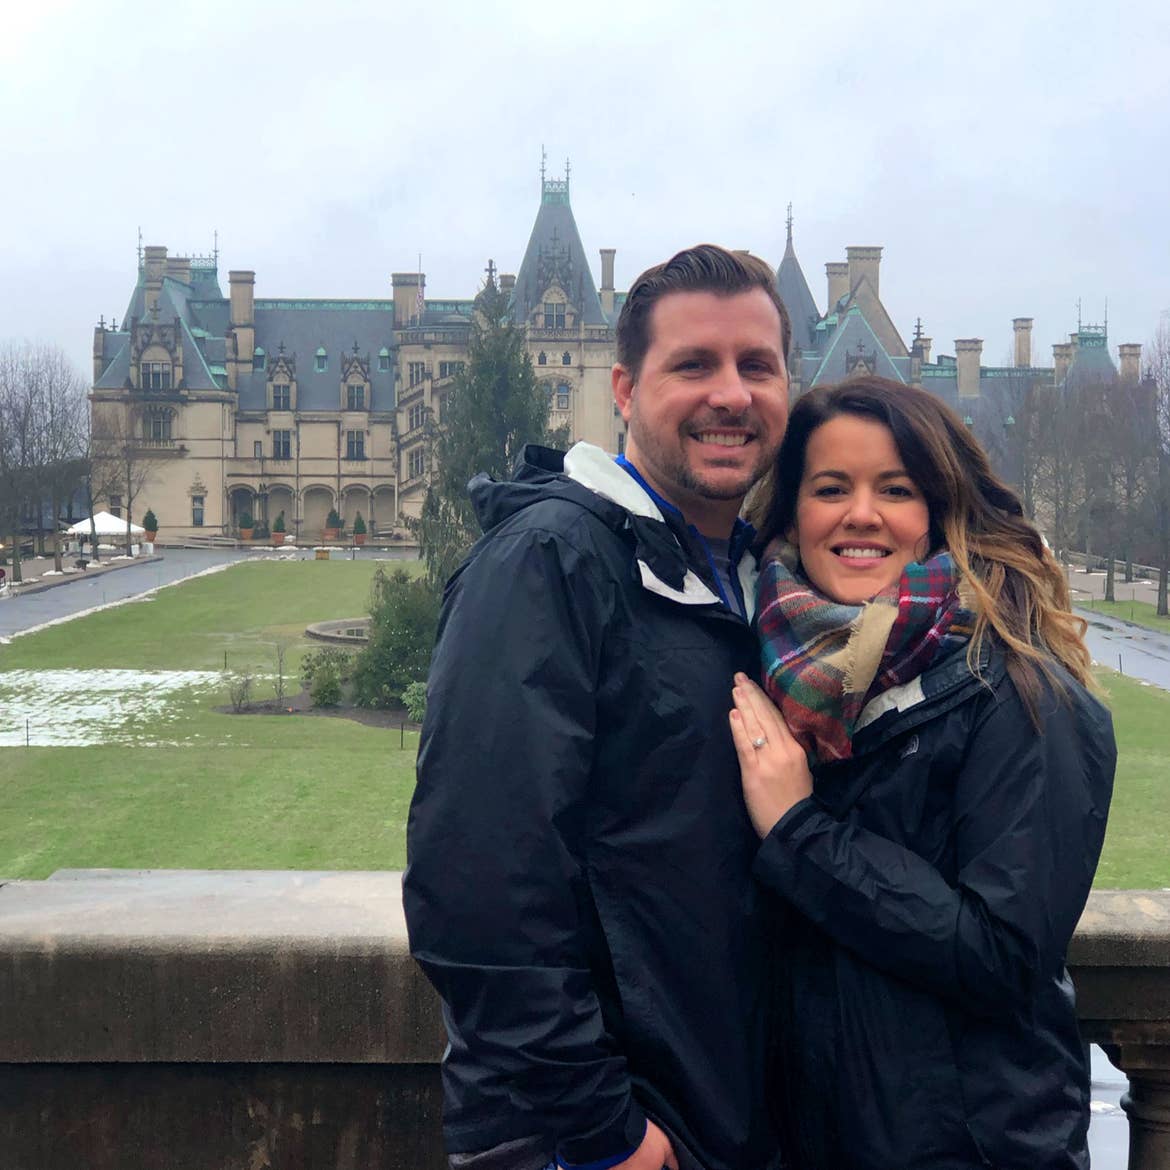 Author, Jenn C. Harmon (right), and husband (left) stand in front of the Biltmore Estate wearing black jackets and a scarf on a grey cloudy day.